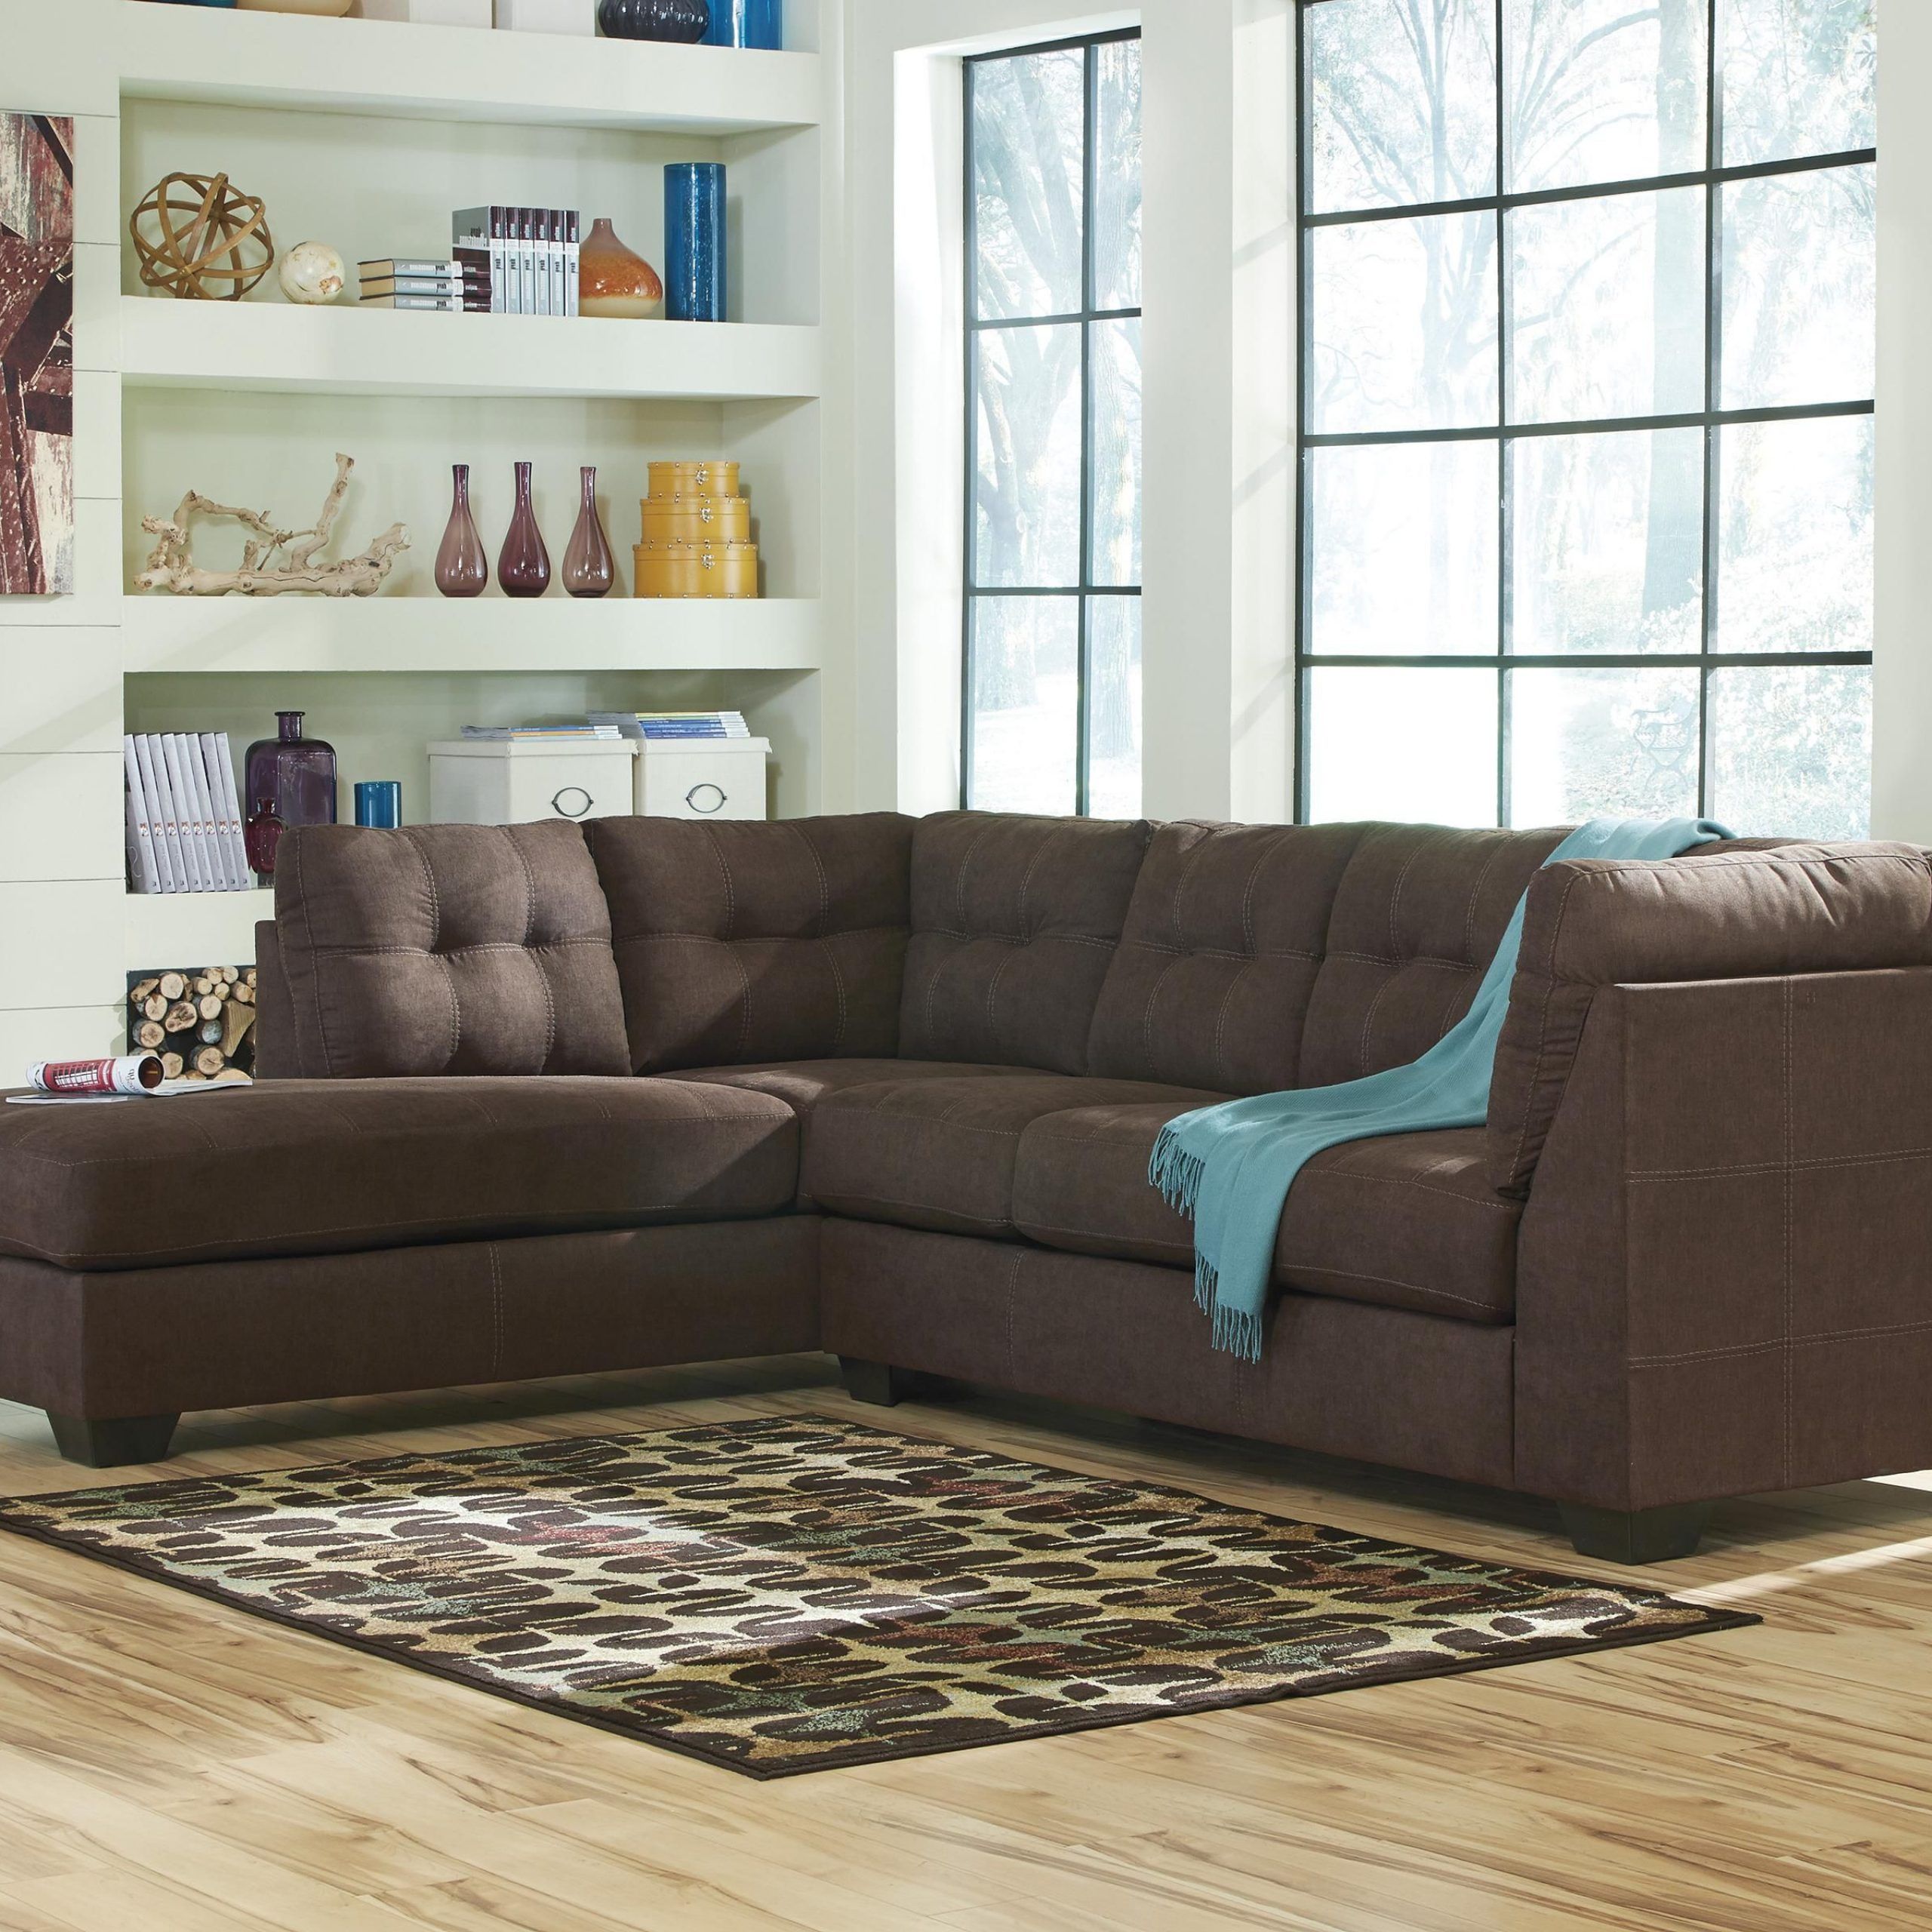 Maier – Walnut 2 Piece Sectional With Left Chaise Intended For 2pc Maddox Right Arm Facing Sectional Sofas With Chaise Brown (View 3 of 15)